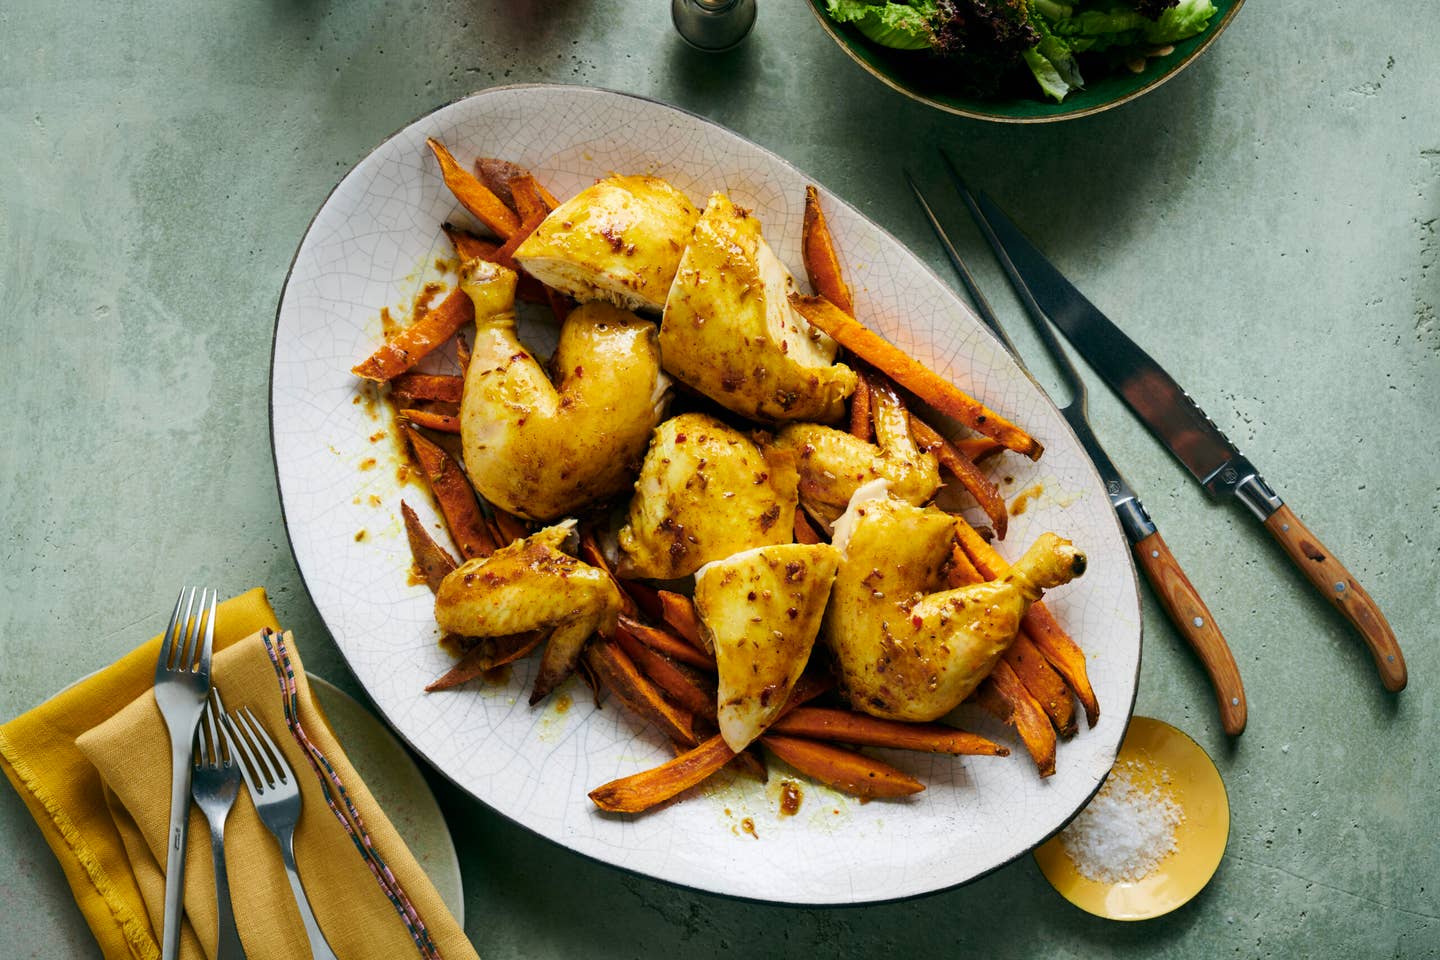 Spicy Maple Roasted Chicken with Sweet Potato Oven Fries